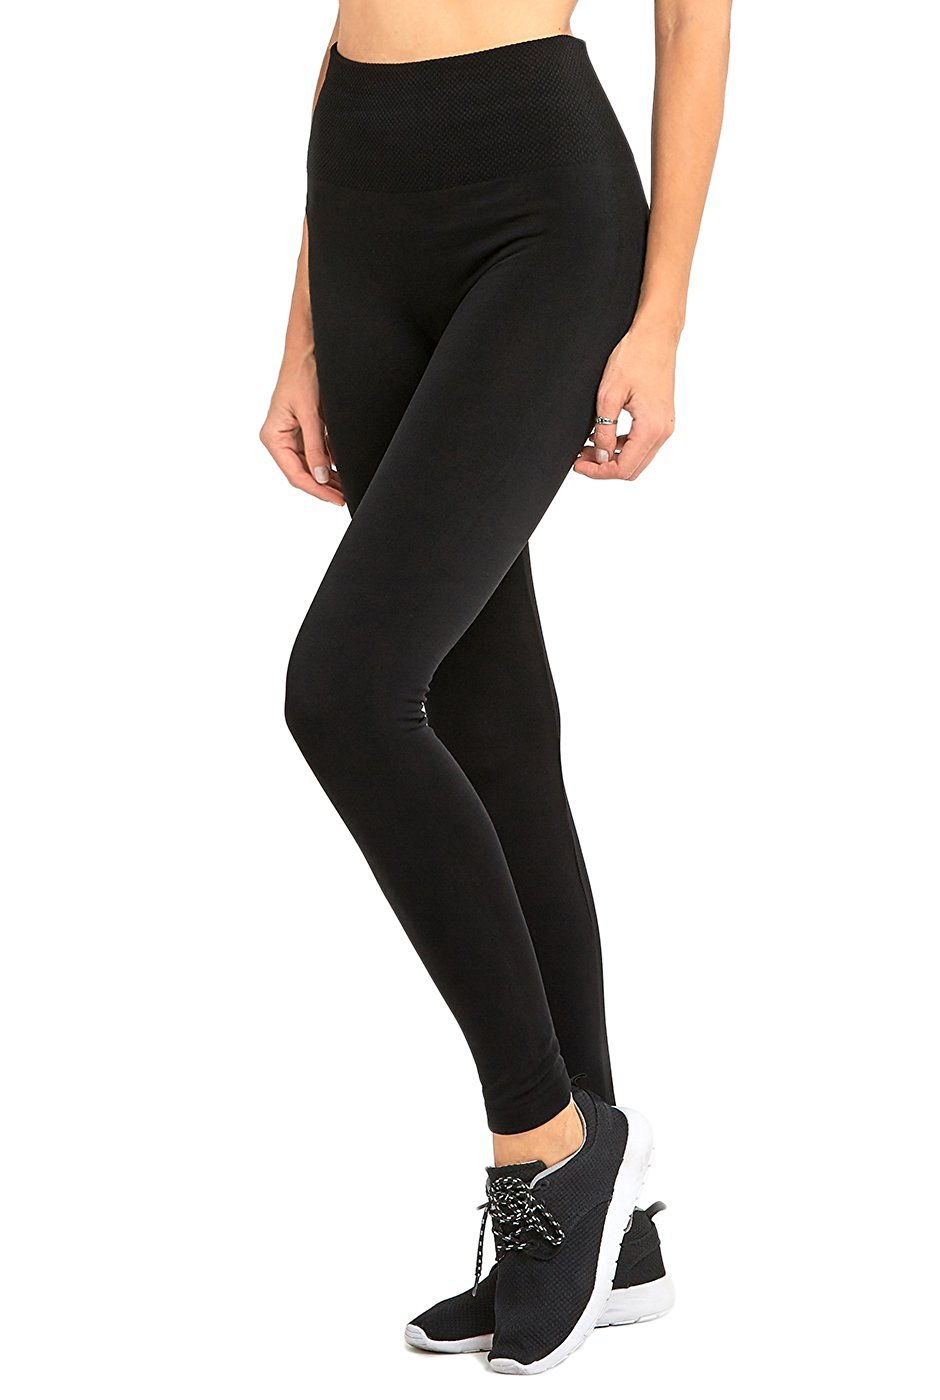 Women's Brushed Sculpt High-rise Pocketed Leggings - All In Motion™ Dark  Blue Xxl : Target